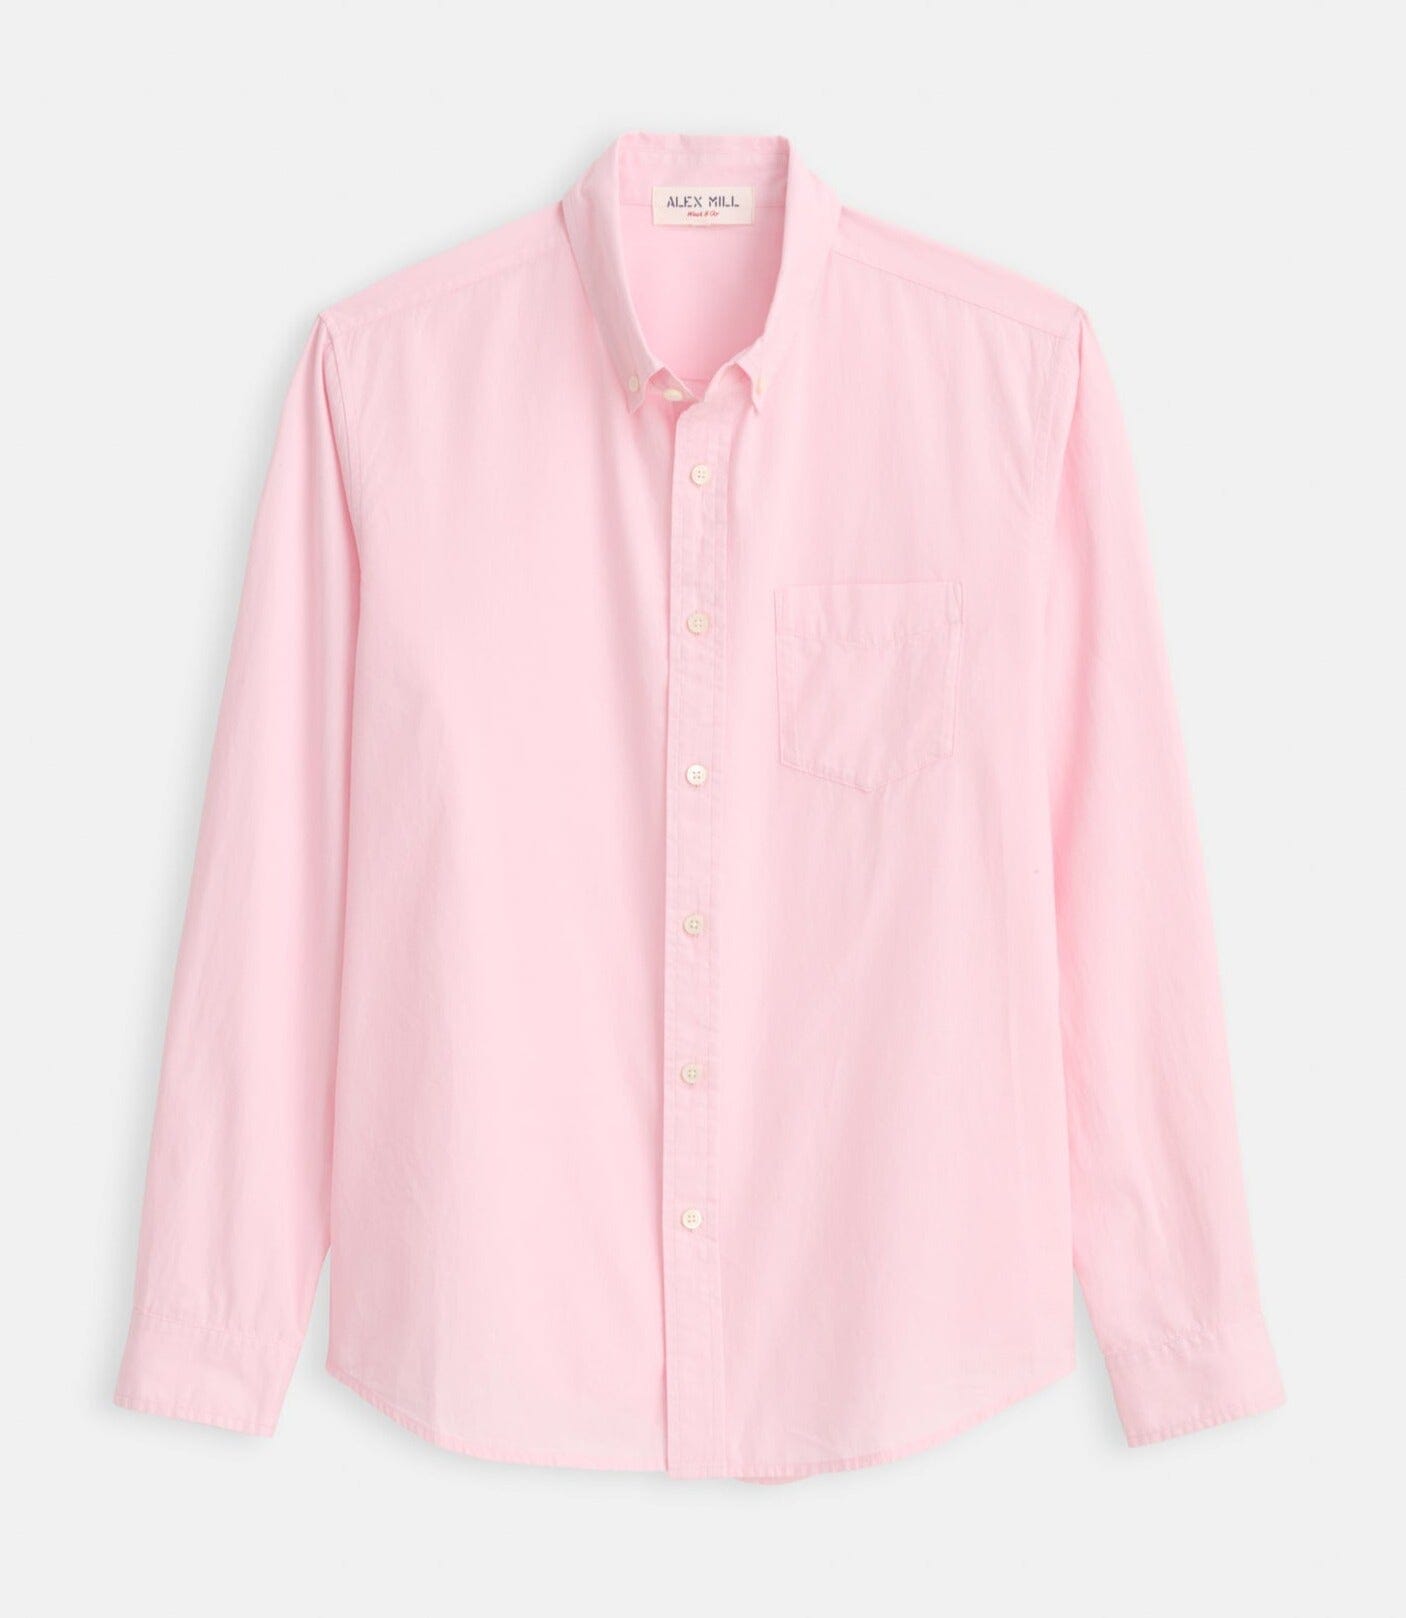 Alex Mill - Mill Shirt in End on End in Pink - City Workshop Men's Supply Co.